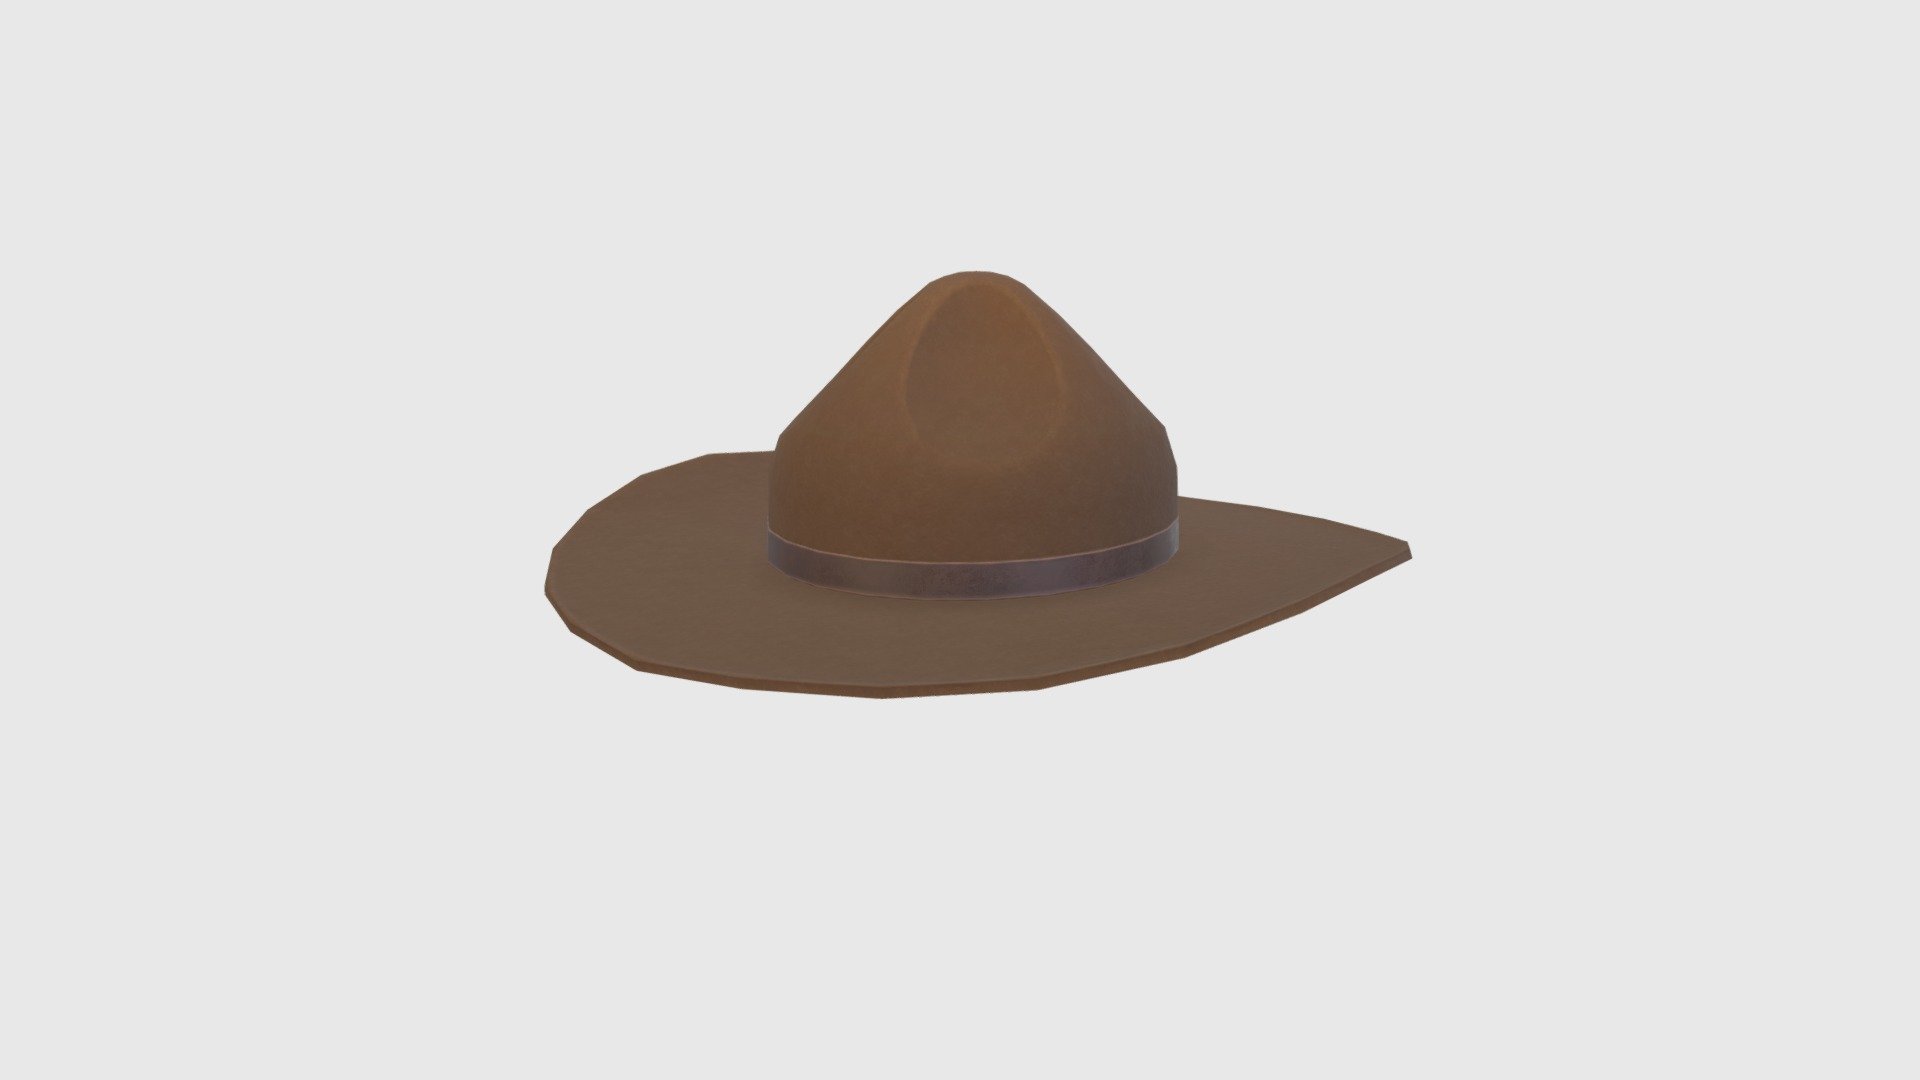 Drill Sergeant Hat 3d model in cartoon style.

3ds max 2014 file, FBX,OBJ and PNG texture in Additional file.

Non-Overlap UVs

Texture include
- Base Color
- Normal
- Roughness

2048x2048 PNG texture

928 poly 
922 vert 
In subdivision Level 0 - Drill Sergeant Hat - Buy Royalty Free 3D model by bariacg 3d model